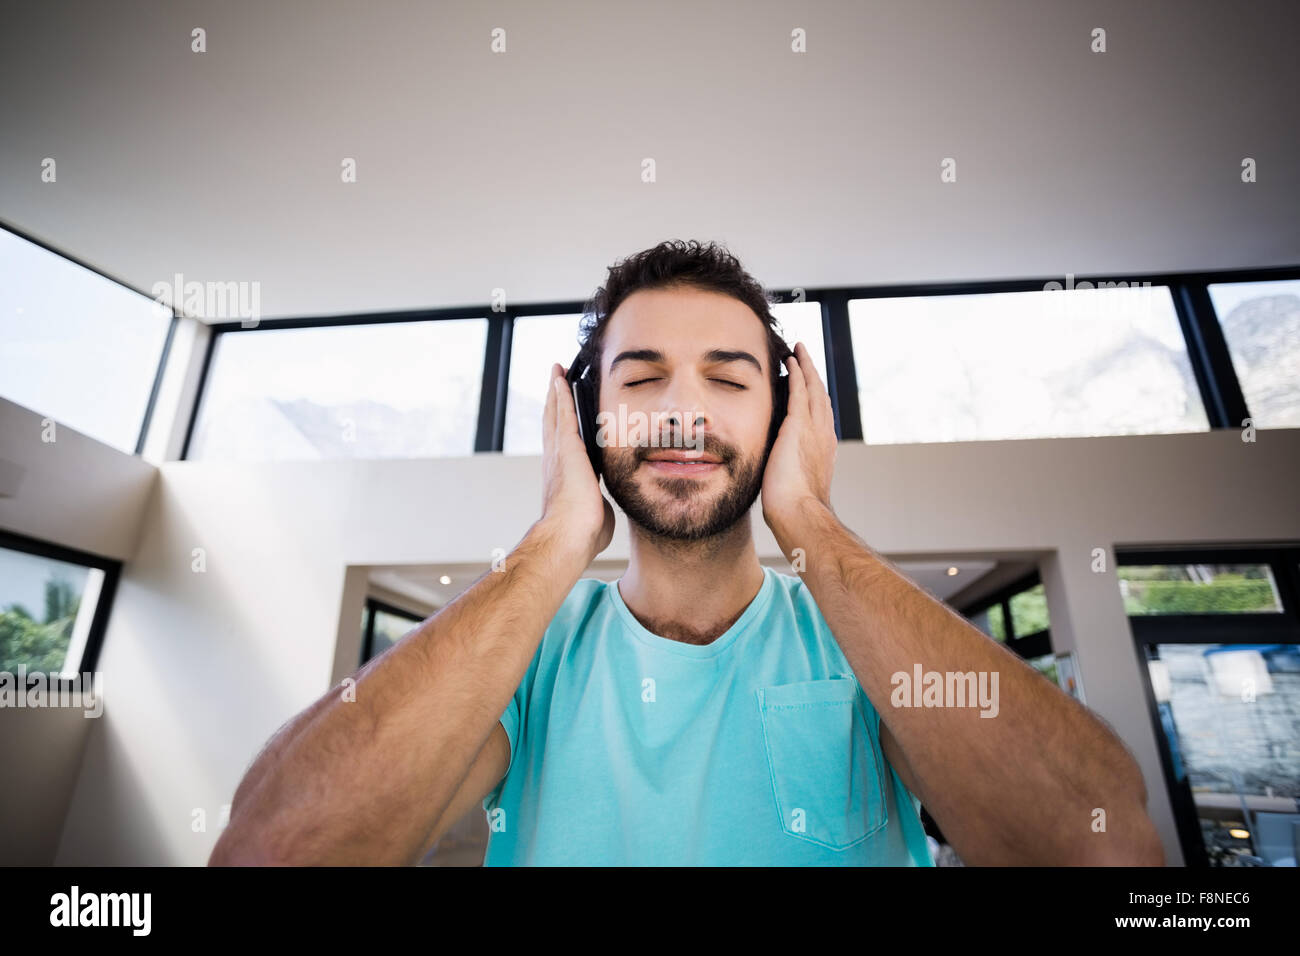 Relaxed man with hands on headphones Stock Photo